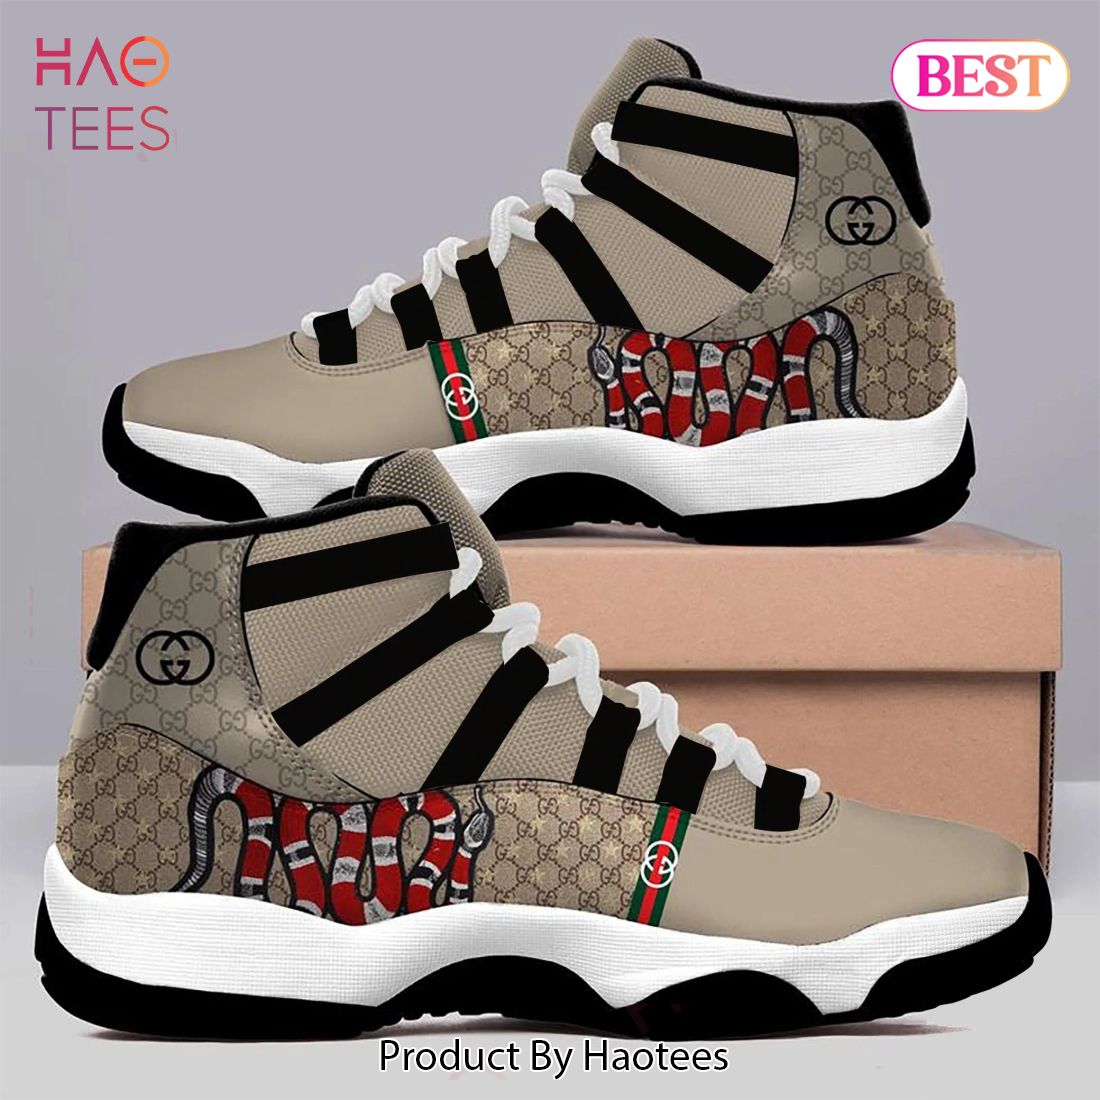 NEW FASHION] Gucci Snake Air Jordan 11 Sneakers Shoes Hot Gifts For Women